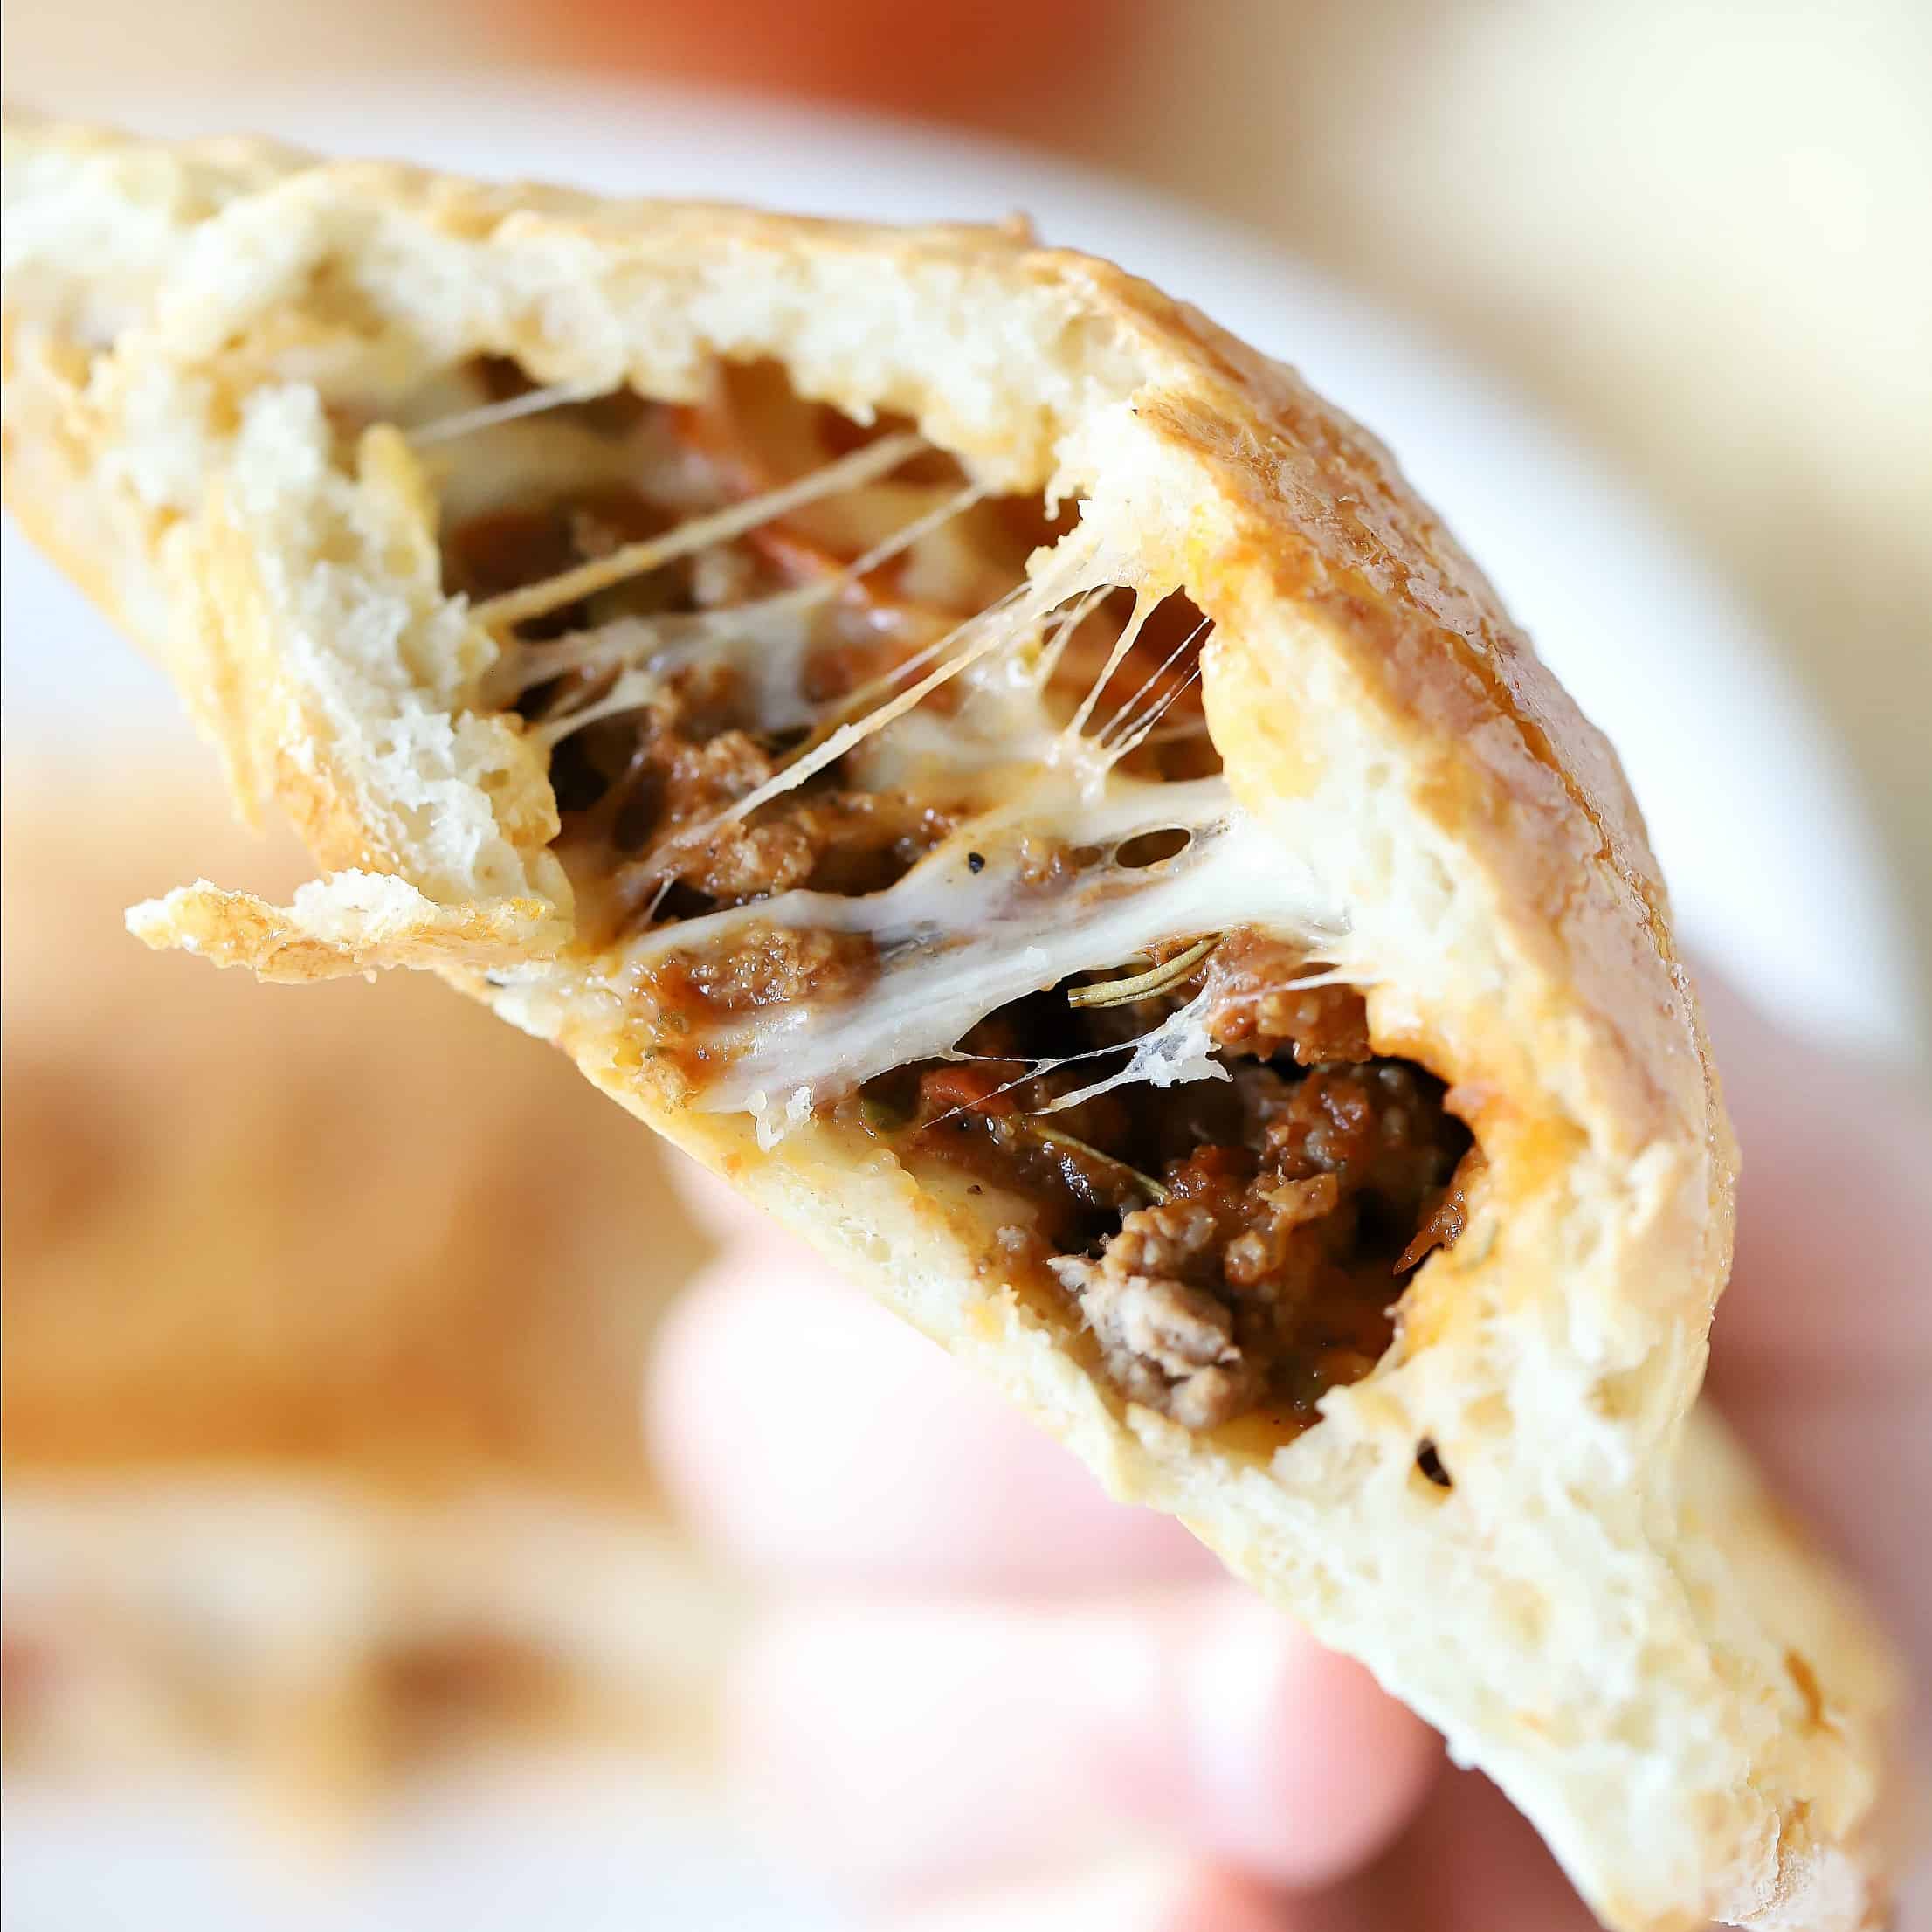 Ooey gooey cheesy pizza pocket center. Filled with round beef, pepperoni and melty cheese. #ad